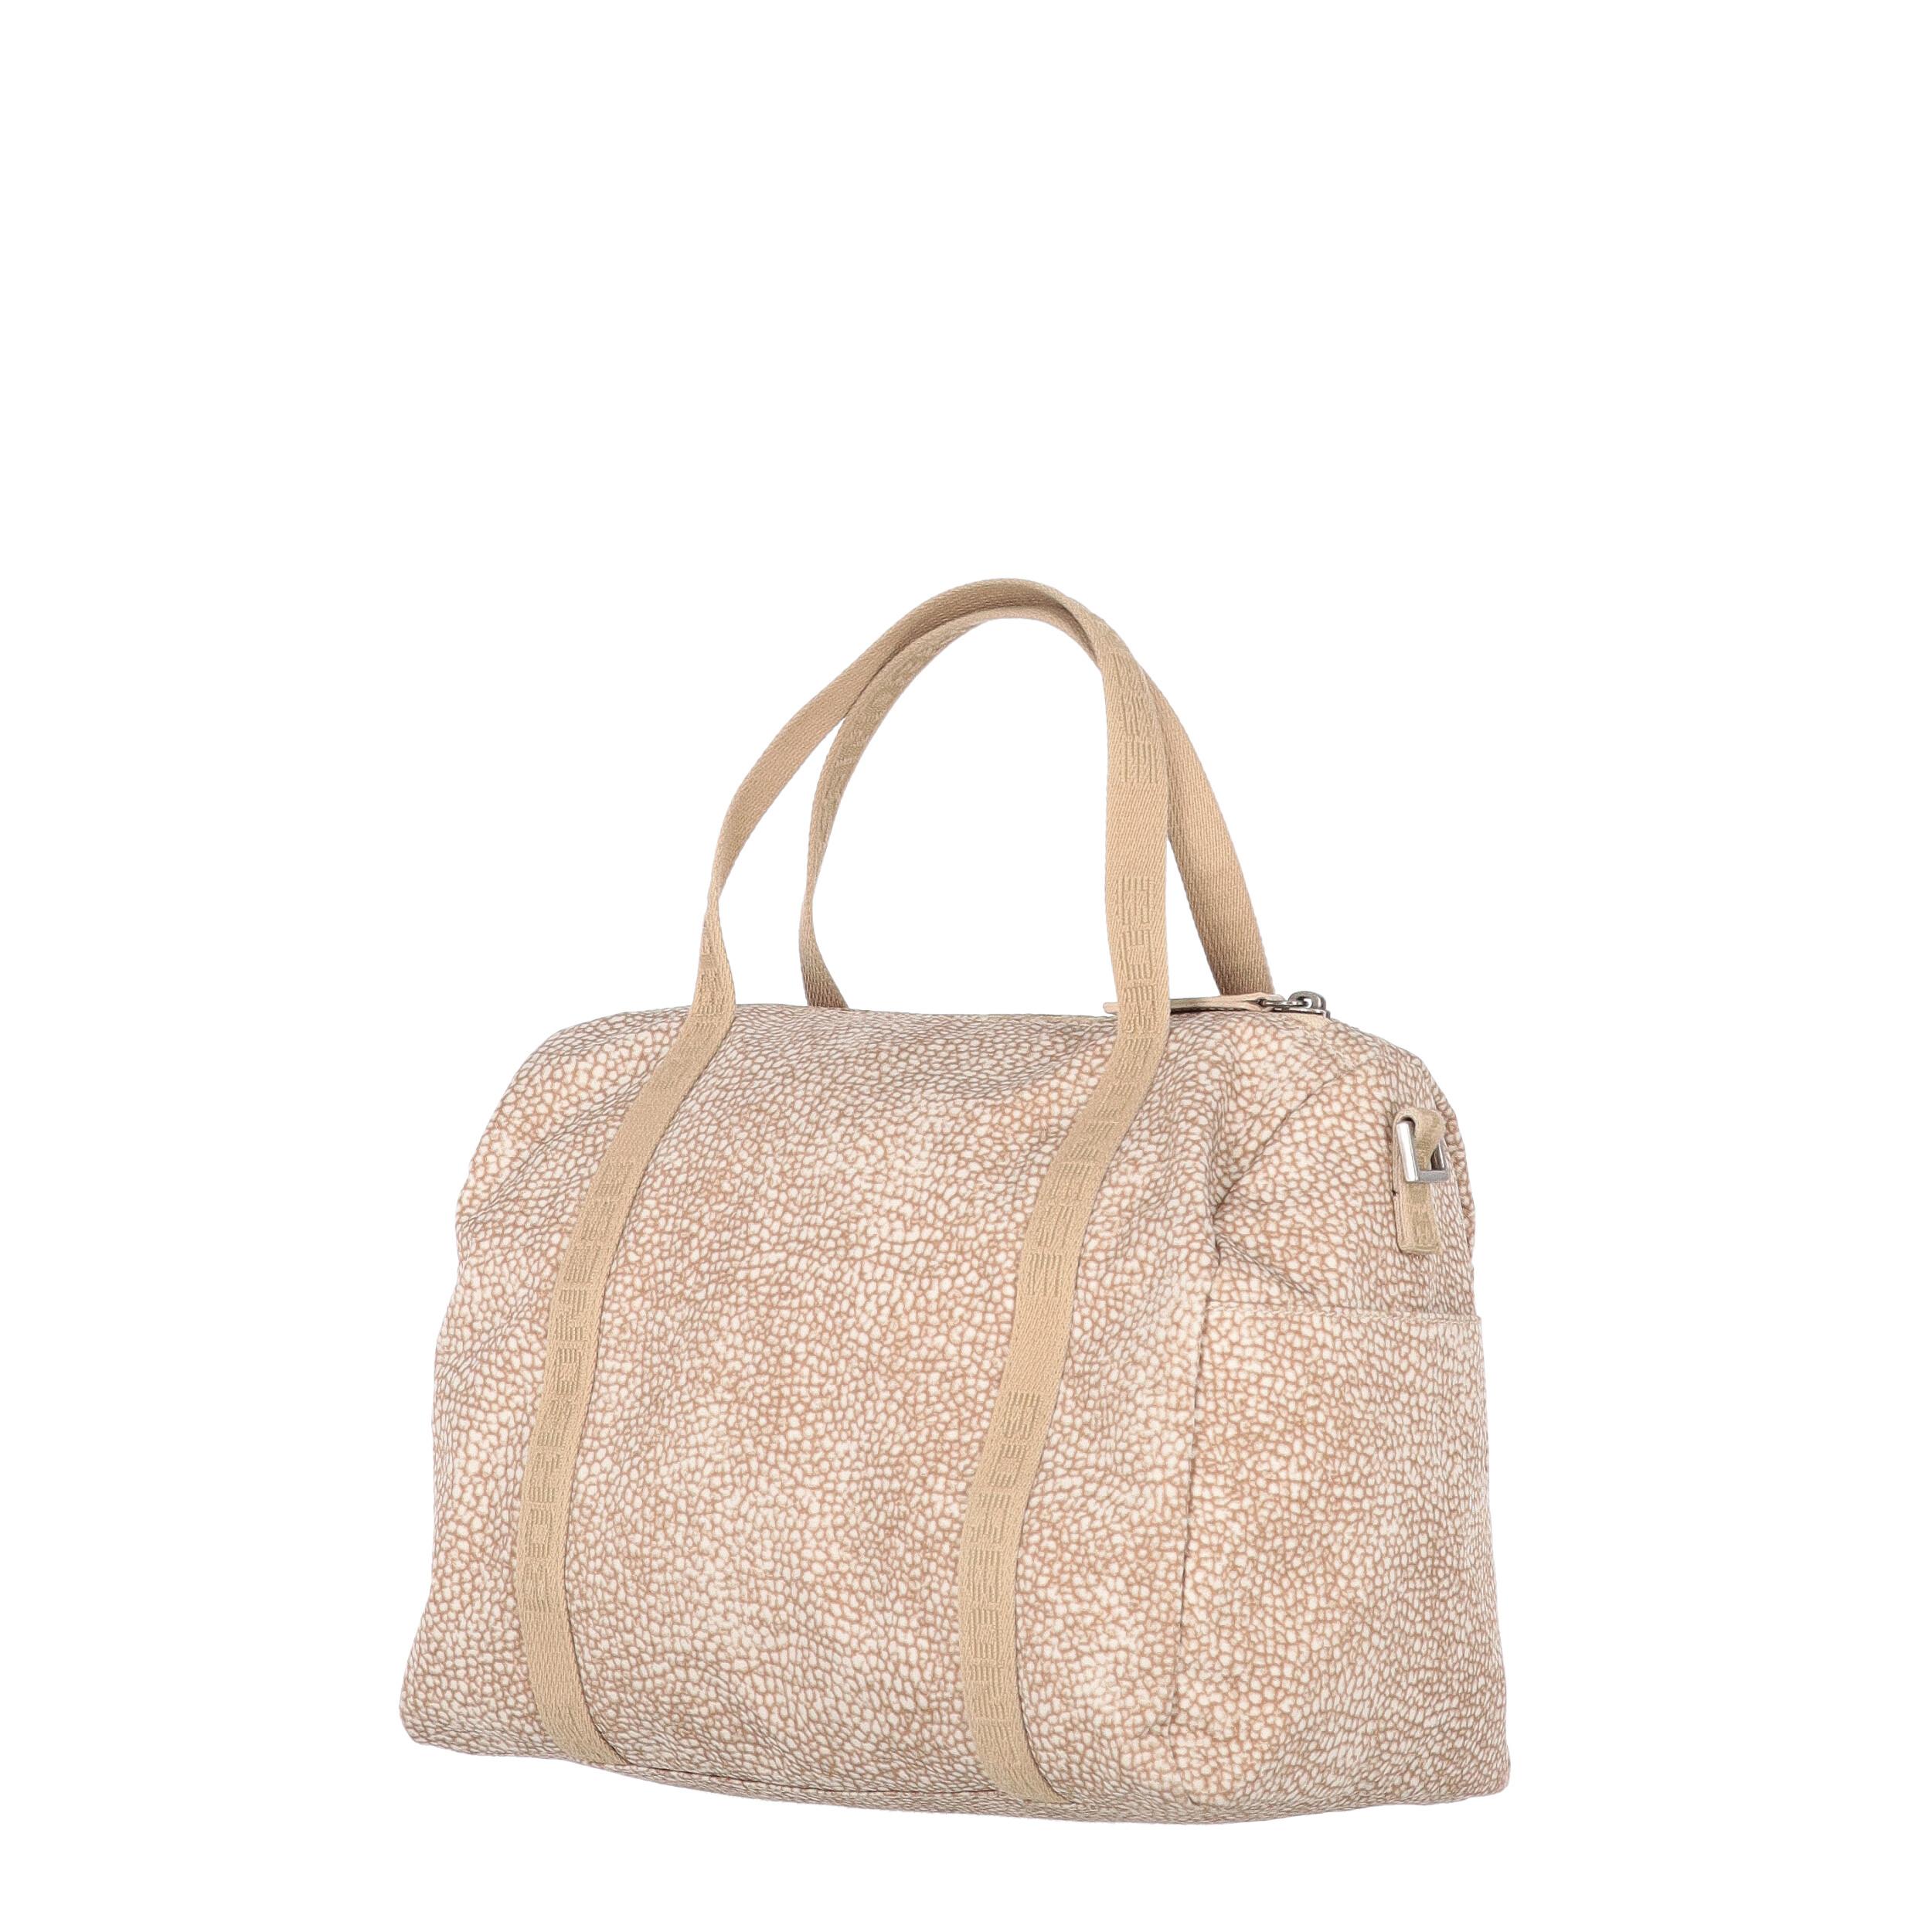 Borbonese beige jet op print fabric carry-all bag. One outer pocket, logoed cotton ribbon handles and removable shoulder strap with two snap-hooks. Zip closure with leather puller.

The product shows a small spot at the base and slight signs of wear